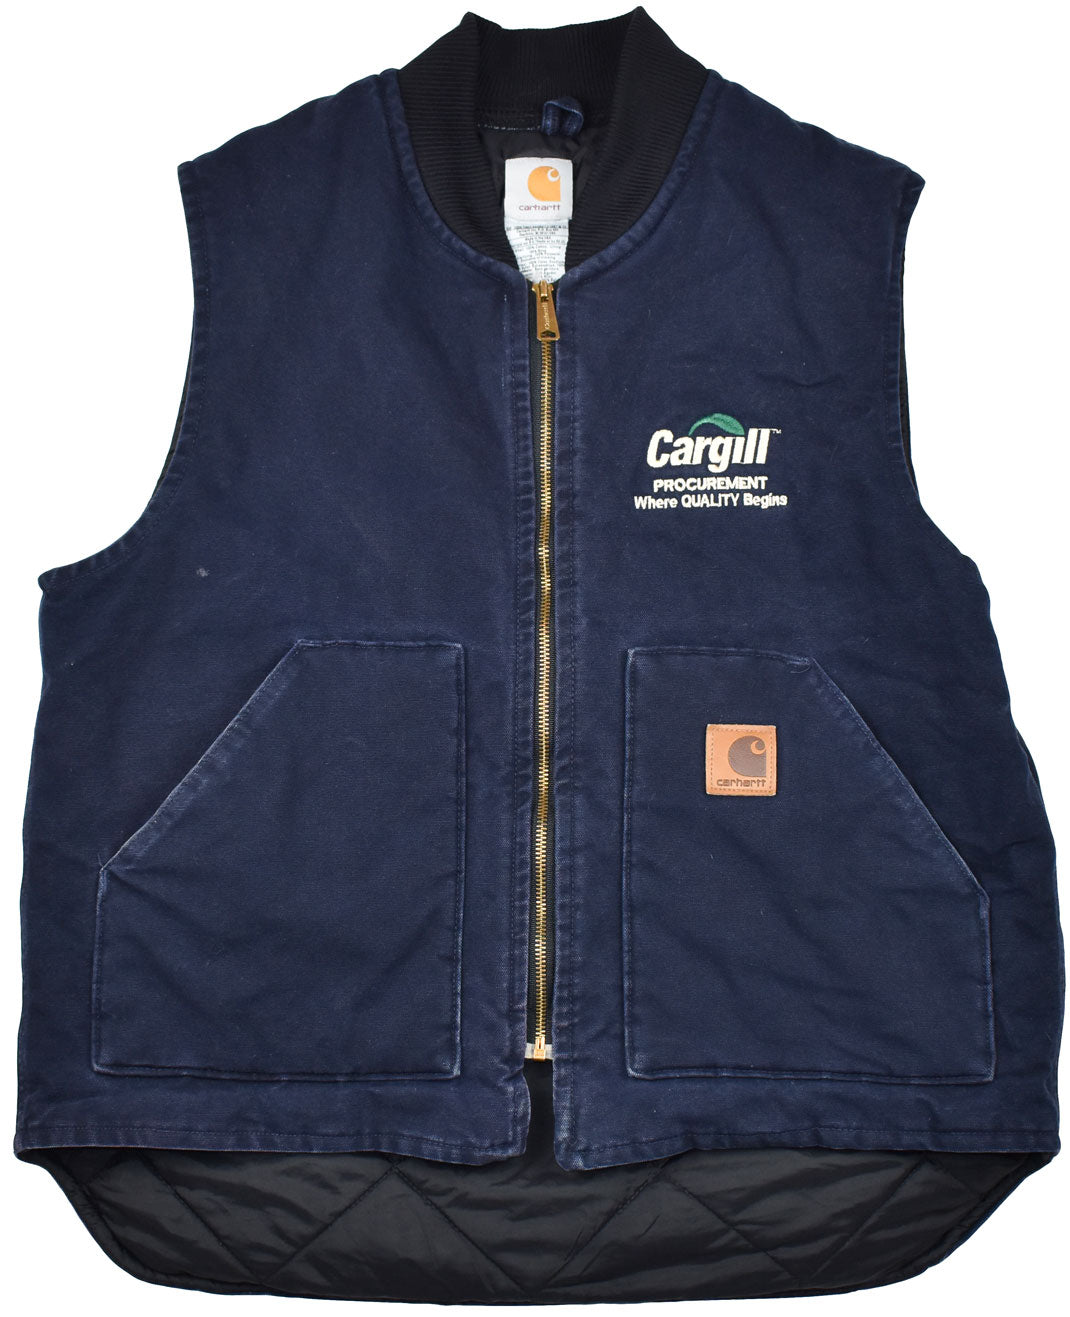 Vintage Carhartt 90s "Cargill" Work Vest  Vintage Carhartt work vest with a super cool vintage look. The piece has some stains, no important holes. The vest has a really good vintage condition.